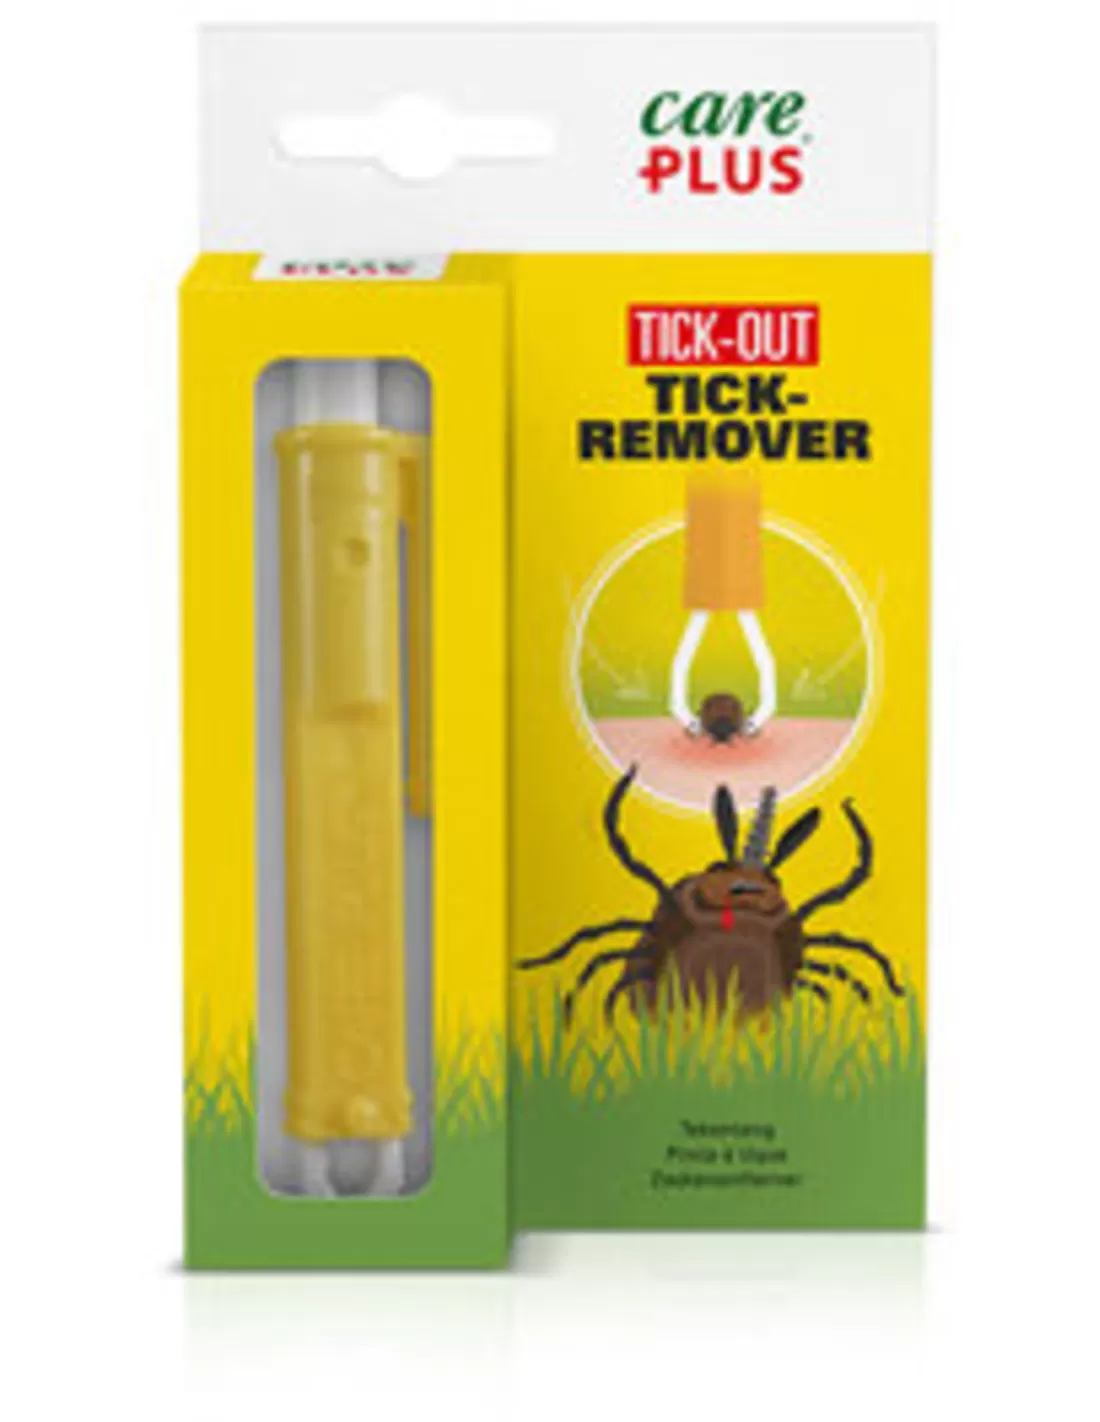 Tick-Out teek remover